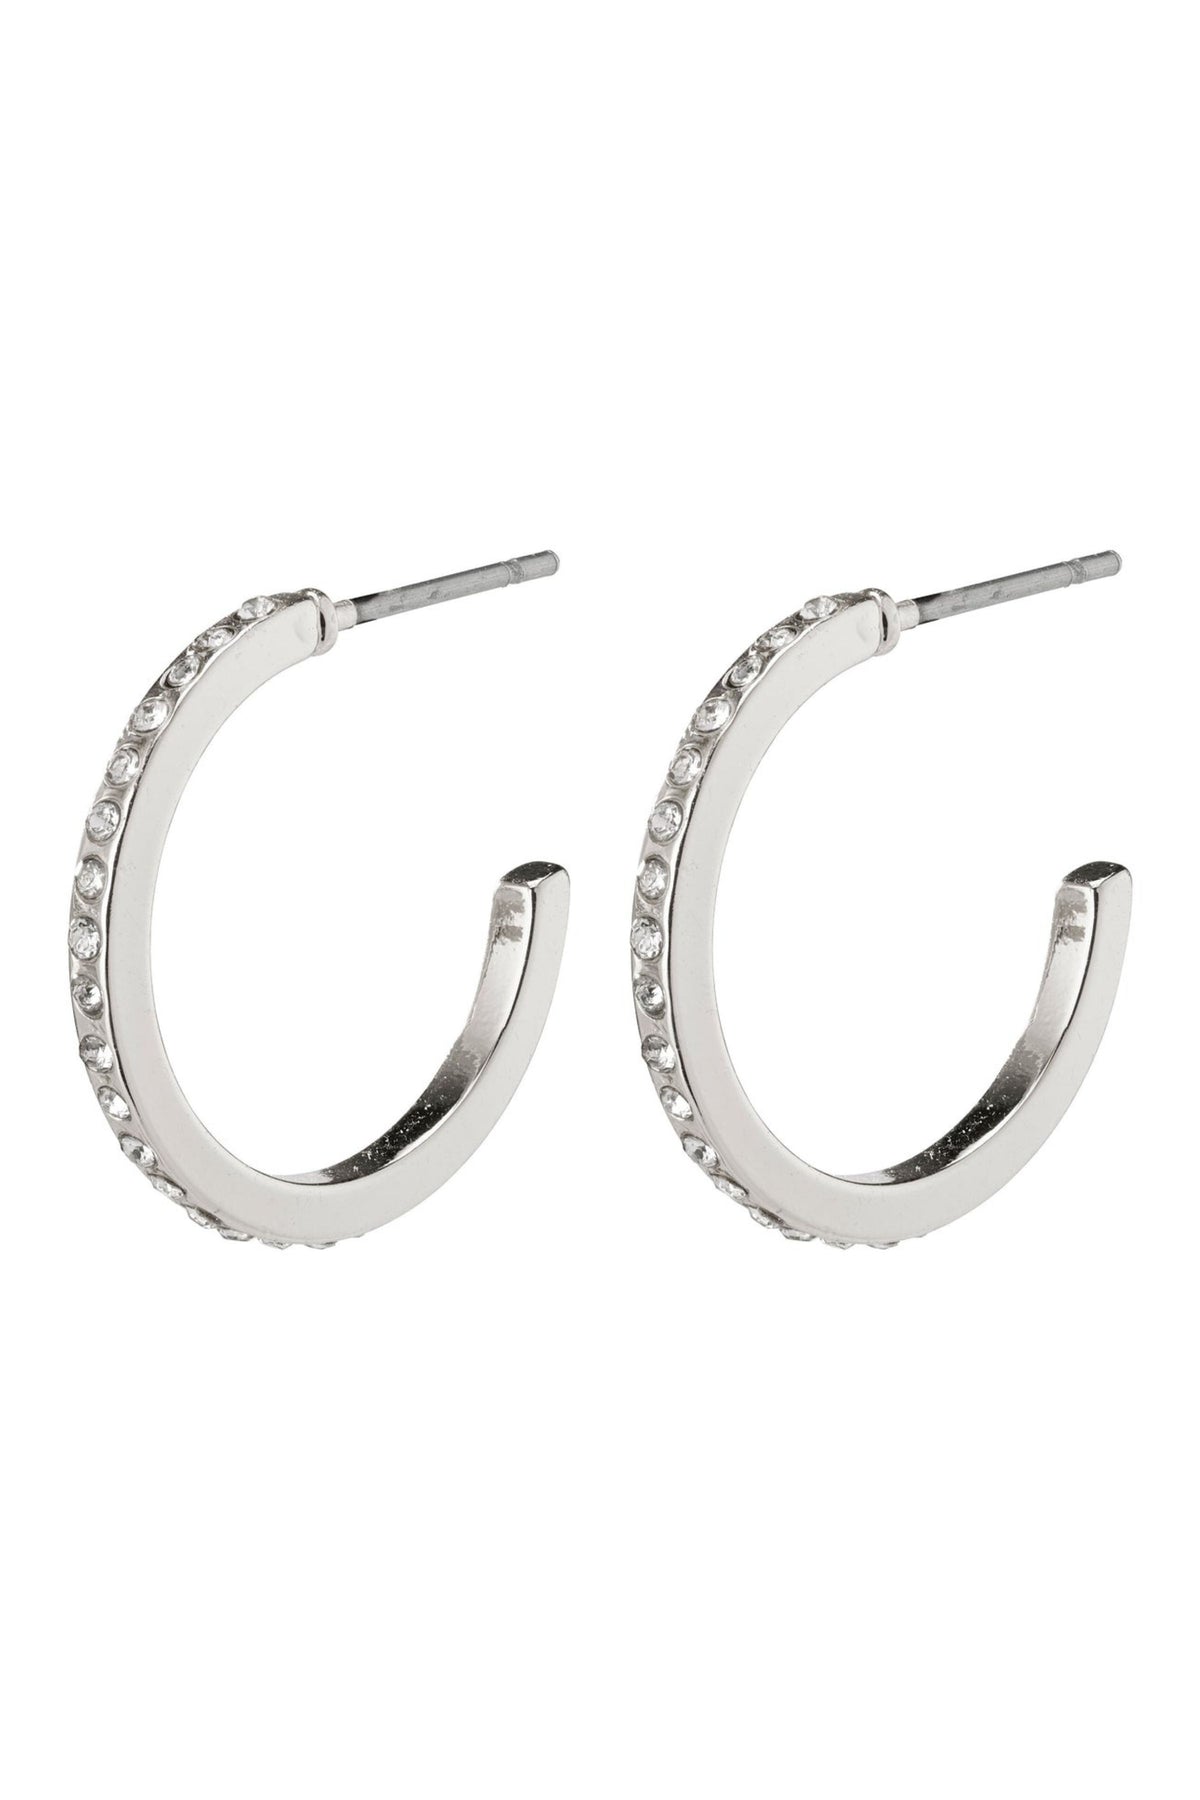 LARGE ROBERTA SILVER PLATED EARRINGS